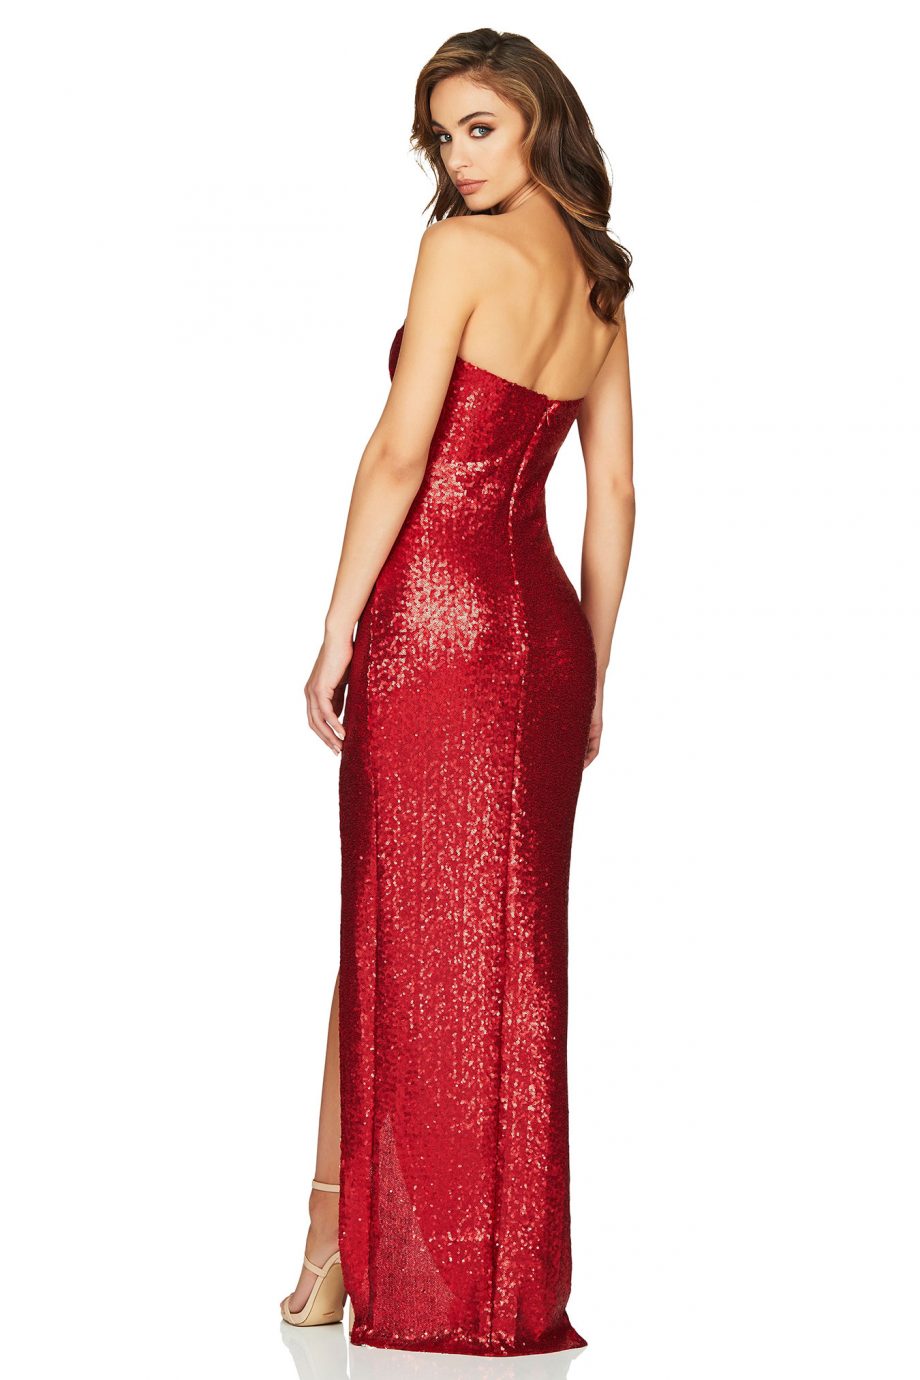 Adele Sequin Gown - Luxette Boutique Buy Nookie on sale now!